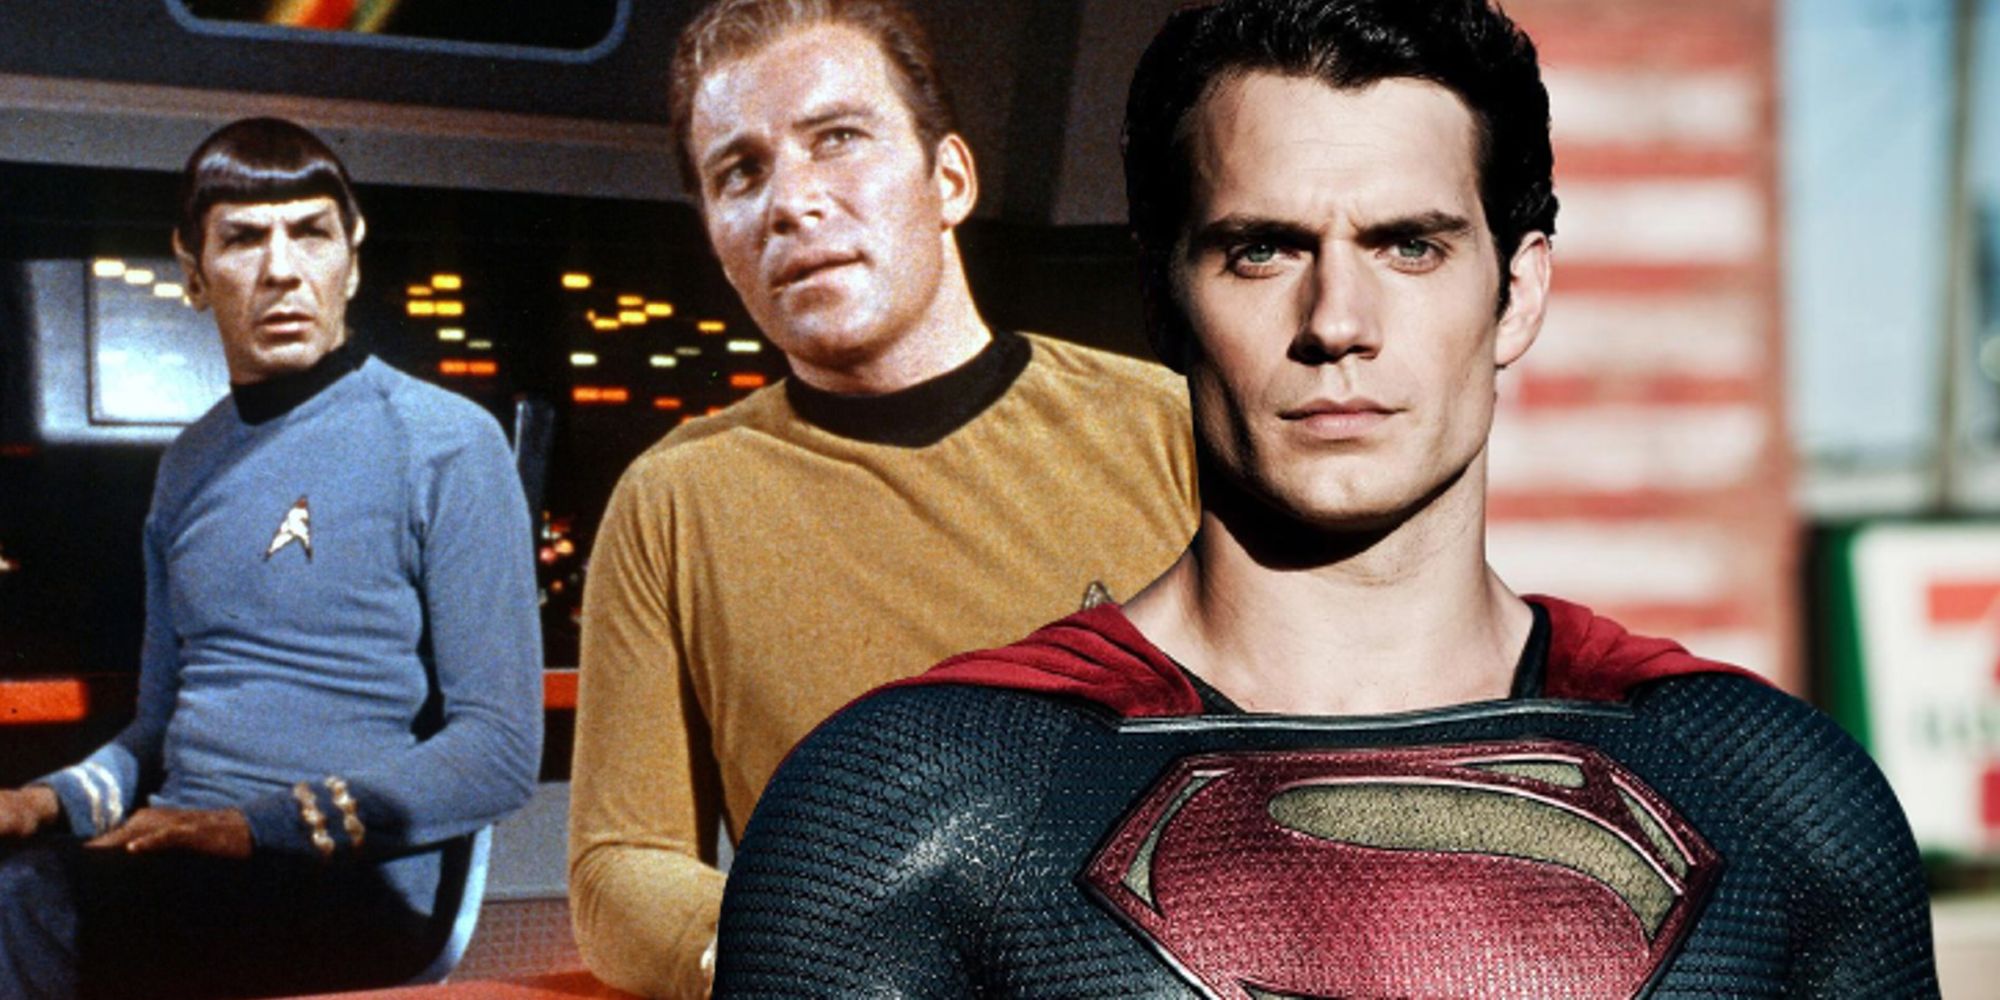 Superman with kirk and spock